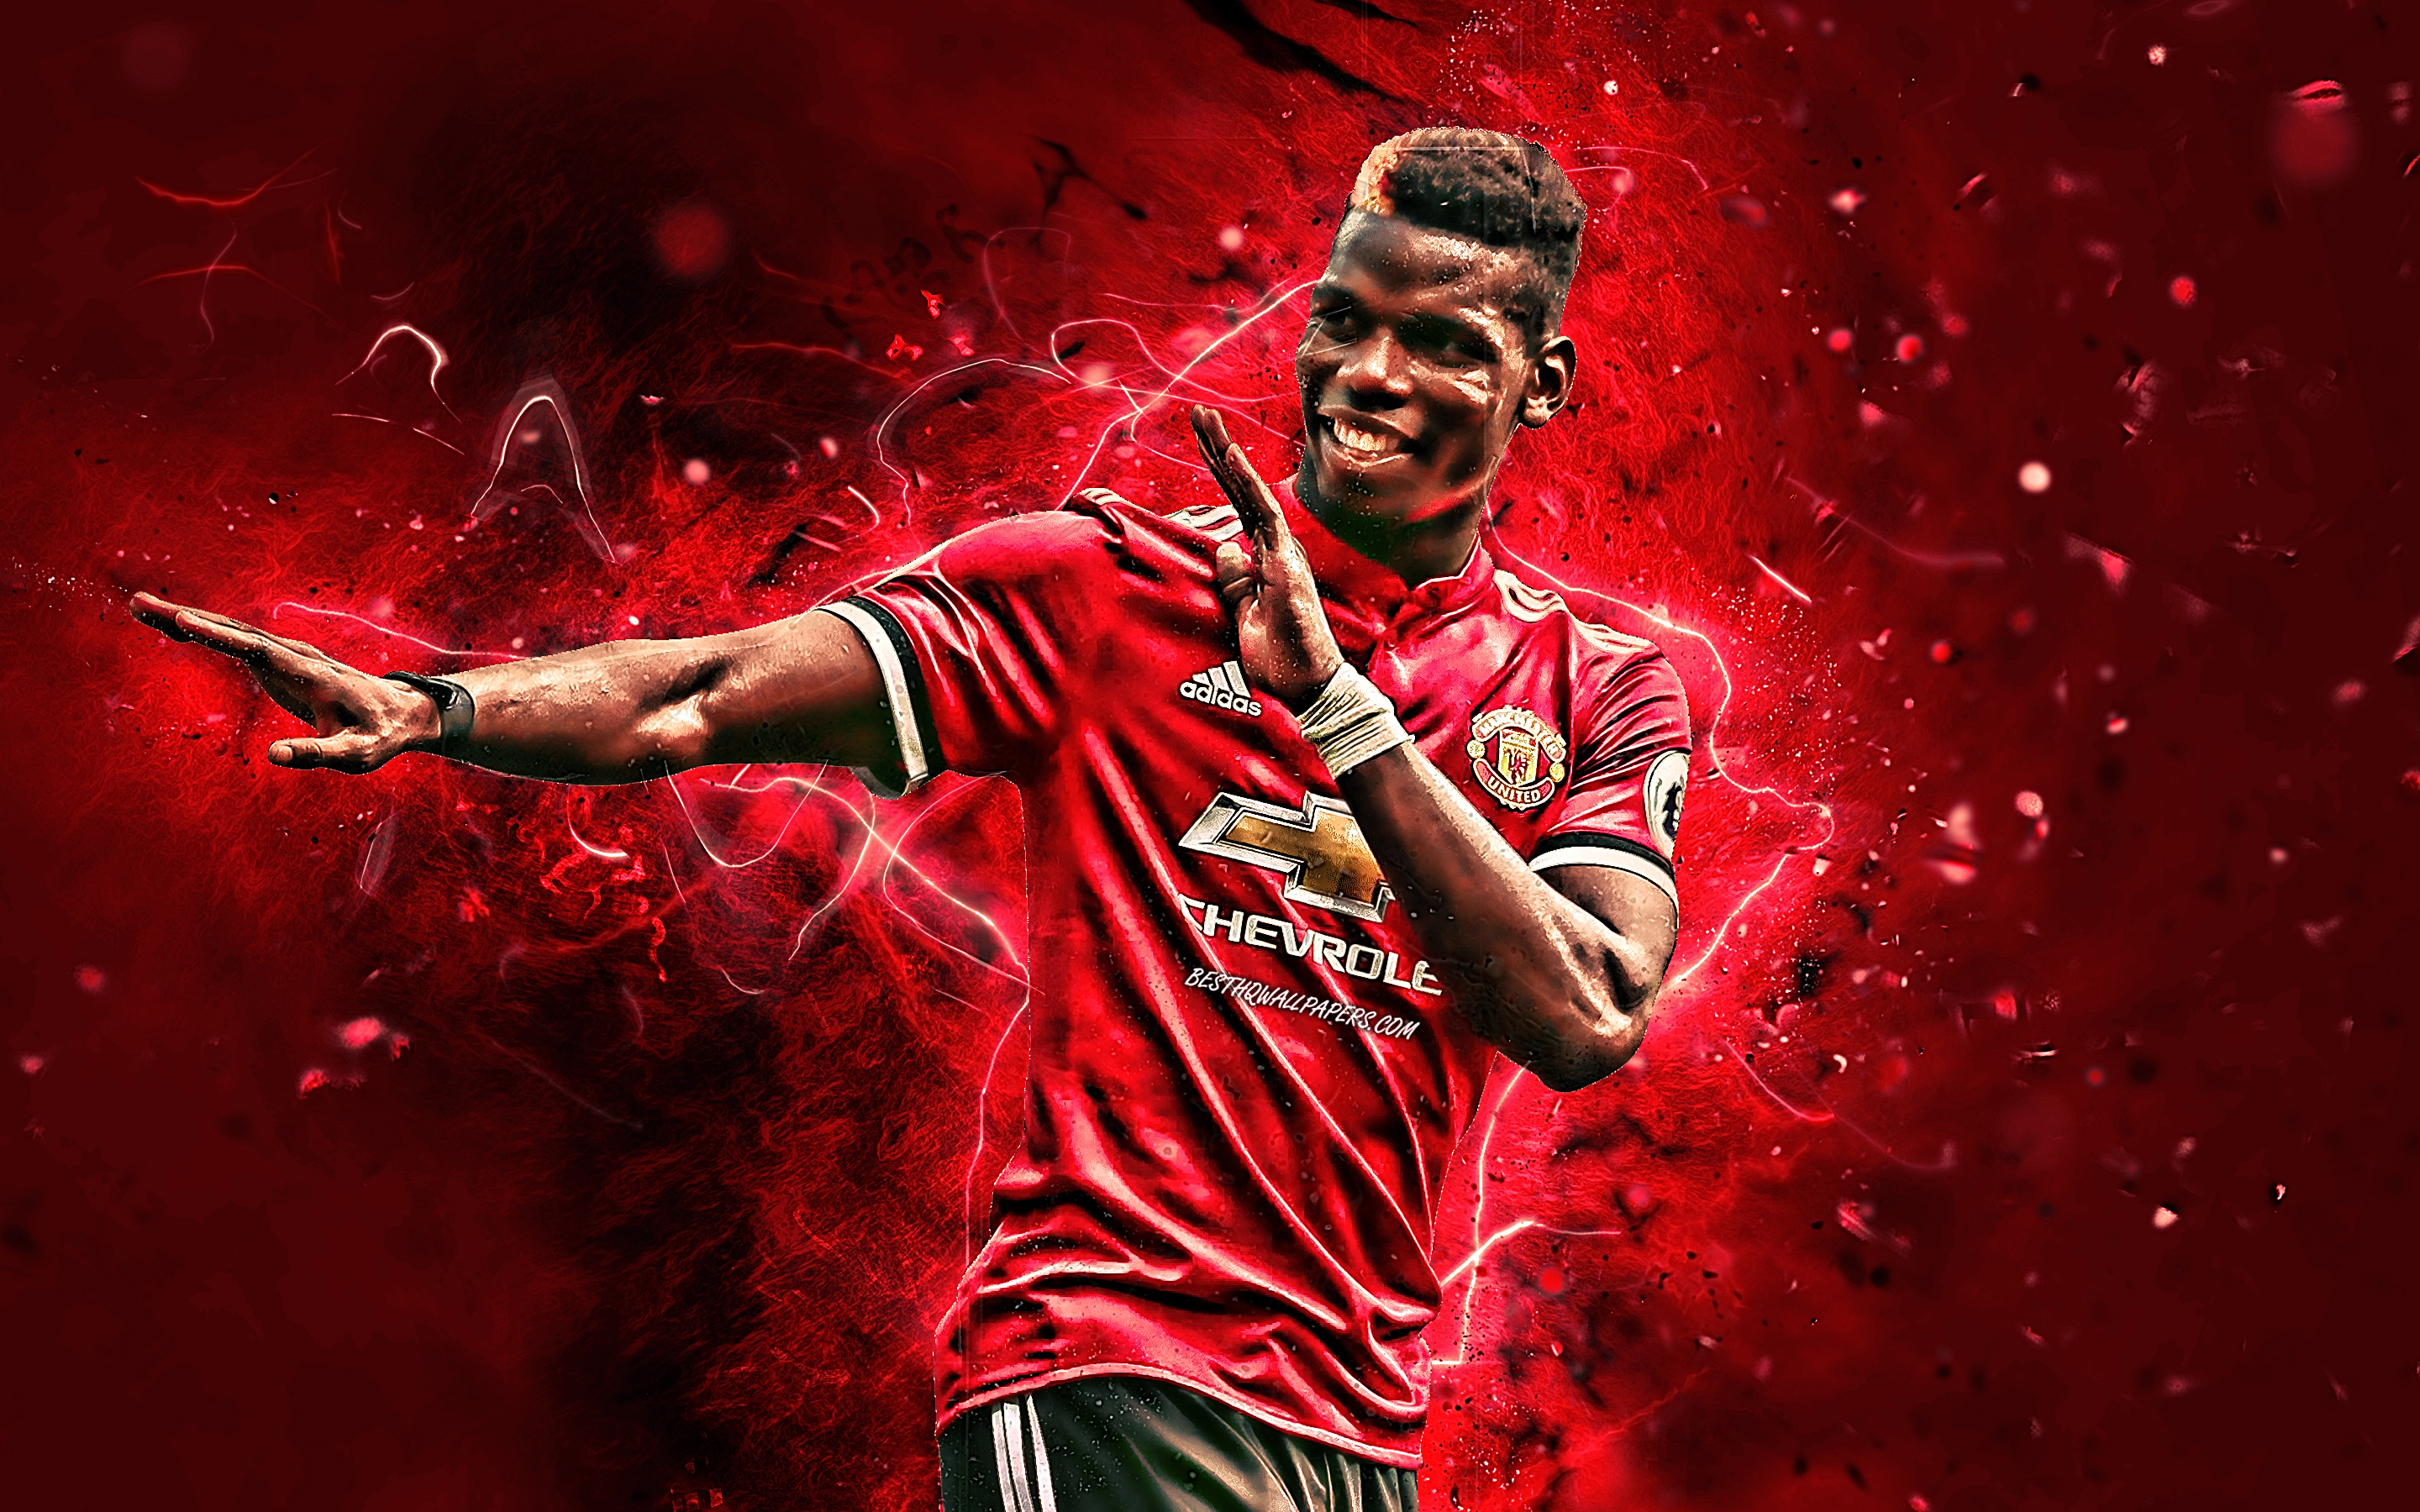 manchester united f c, paul pogba, sports, french, soccer